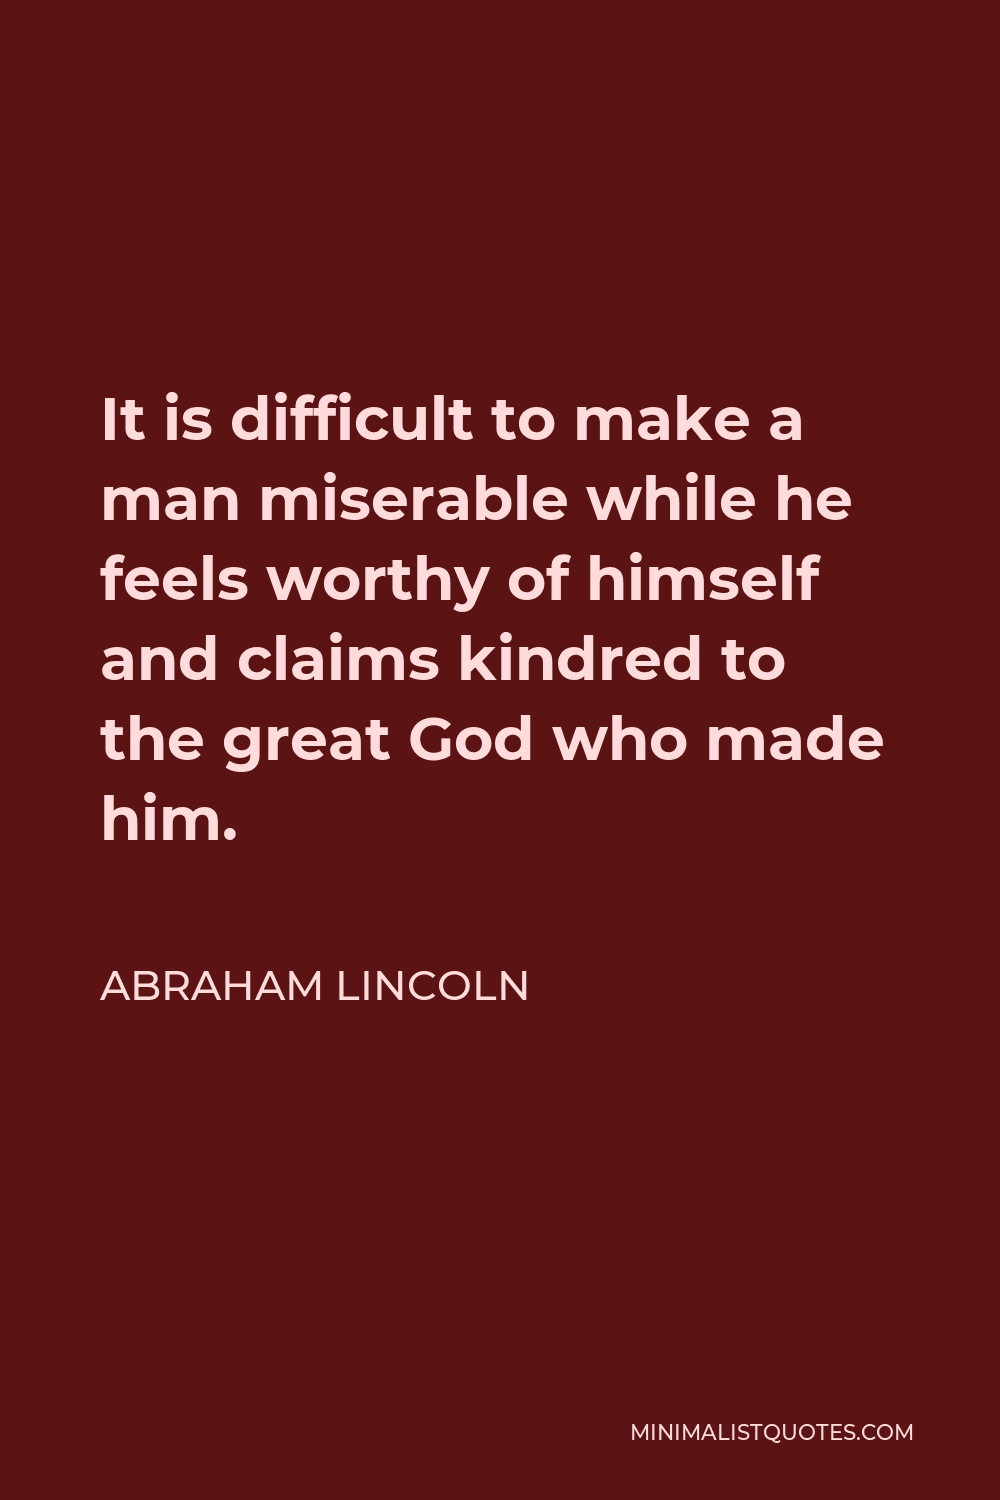 Abraham Lincoln Quote - It is difficult to make a man miserable while he feels worthy of himself and claims kindred to the great God who made him.